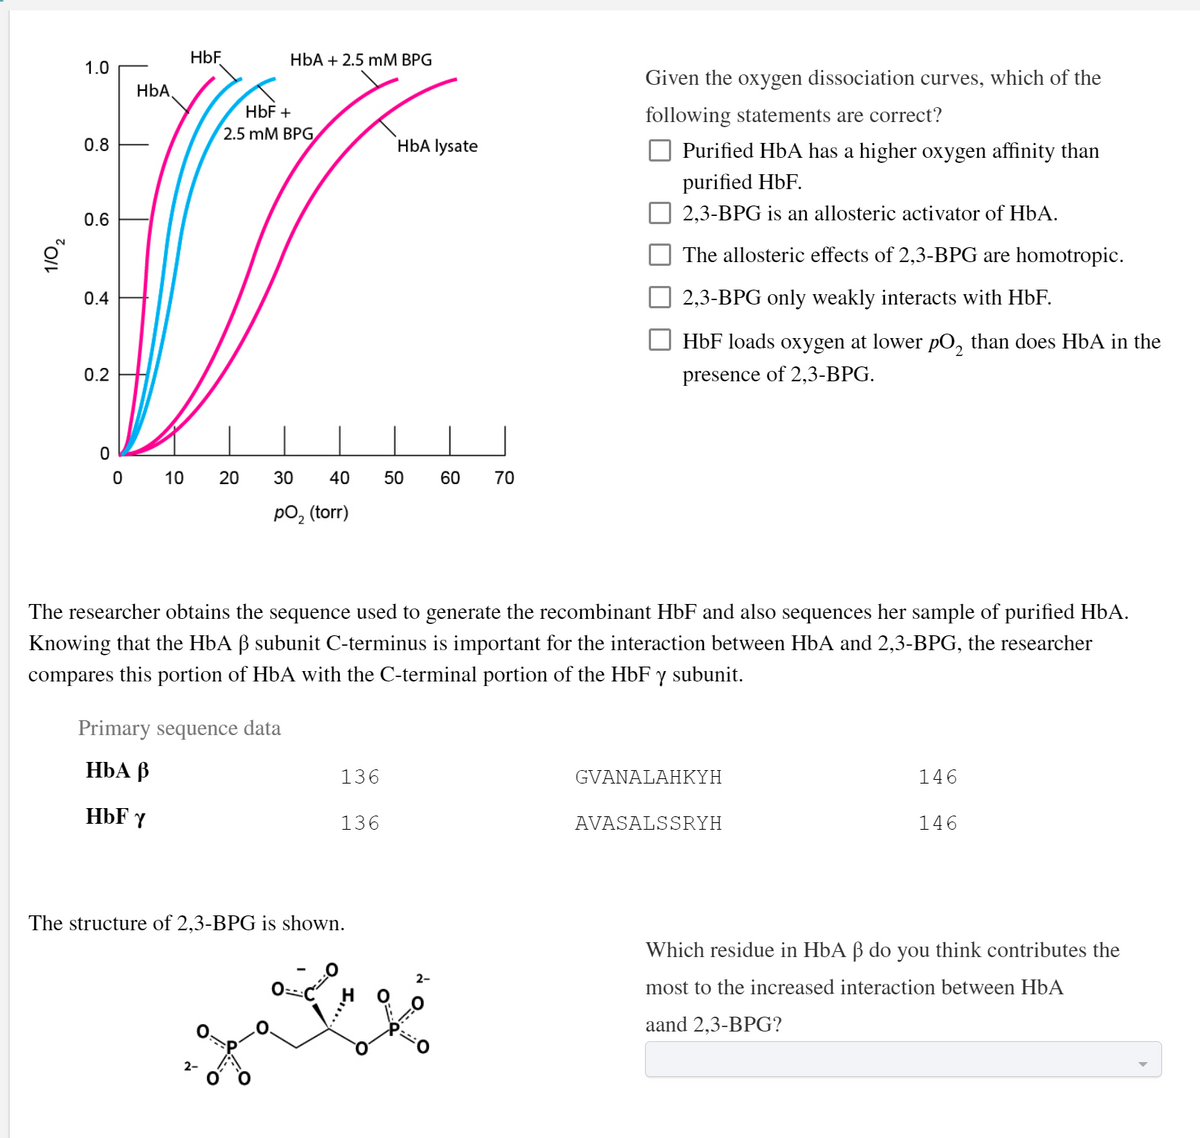 HbF
HbA + 2.5 mM BPG
1.0
Given the oxygen dissociation curves, which of the
HbA
НЬF +
following statements are correct?
2.5 mM BРG
0.8
`HbA lysate
O Purified HbA has a higher oxygen affinity than
purified HbF.
0.6
2,3-BPG is an allosteric activator of HbA.
The allosteric effects of 2,3-BPG are homotropic.
0.4
2,3-BPG only weakly interacts with HbF.
HbF loads oxygen at lower pO, than does HbA in the
0.2
presence of 2,3-BPG.
0 10
30
40
50
60
70
pO, (torr)
The researcher obtains the sequence used to generate the recombinant HbF and also sequences her sample of purified HbA.
Knowing that the HbA ß subunit C-terminus is important for the interaction between HbA and 2,3-BPG, the researcher
compares this portion of HbA with the C-terminal portion of the HbF y subunit.
Primary sequence data
НЬА В
136
GVANALAHKYH
146
HbF Y
136
AVASALSSRYH
146
The structure of 2,3-BPG is shown.
Which residue in HbA ß do you think contributes the
most to the increased interaction between HbA
aand 2,3-BPG?
2-
20
1/0,
